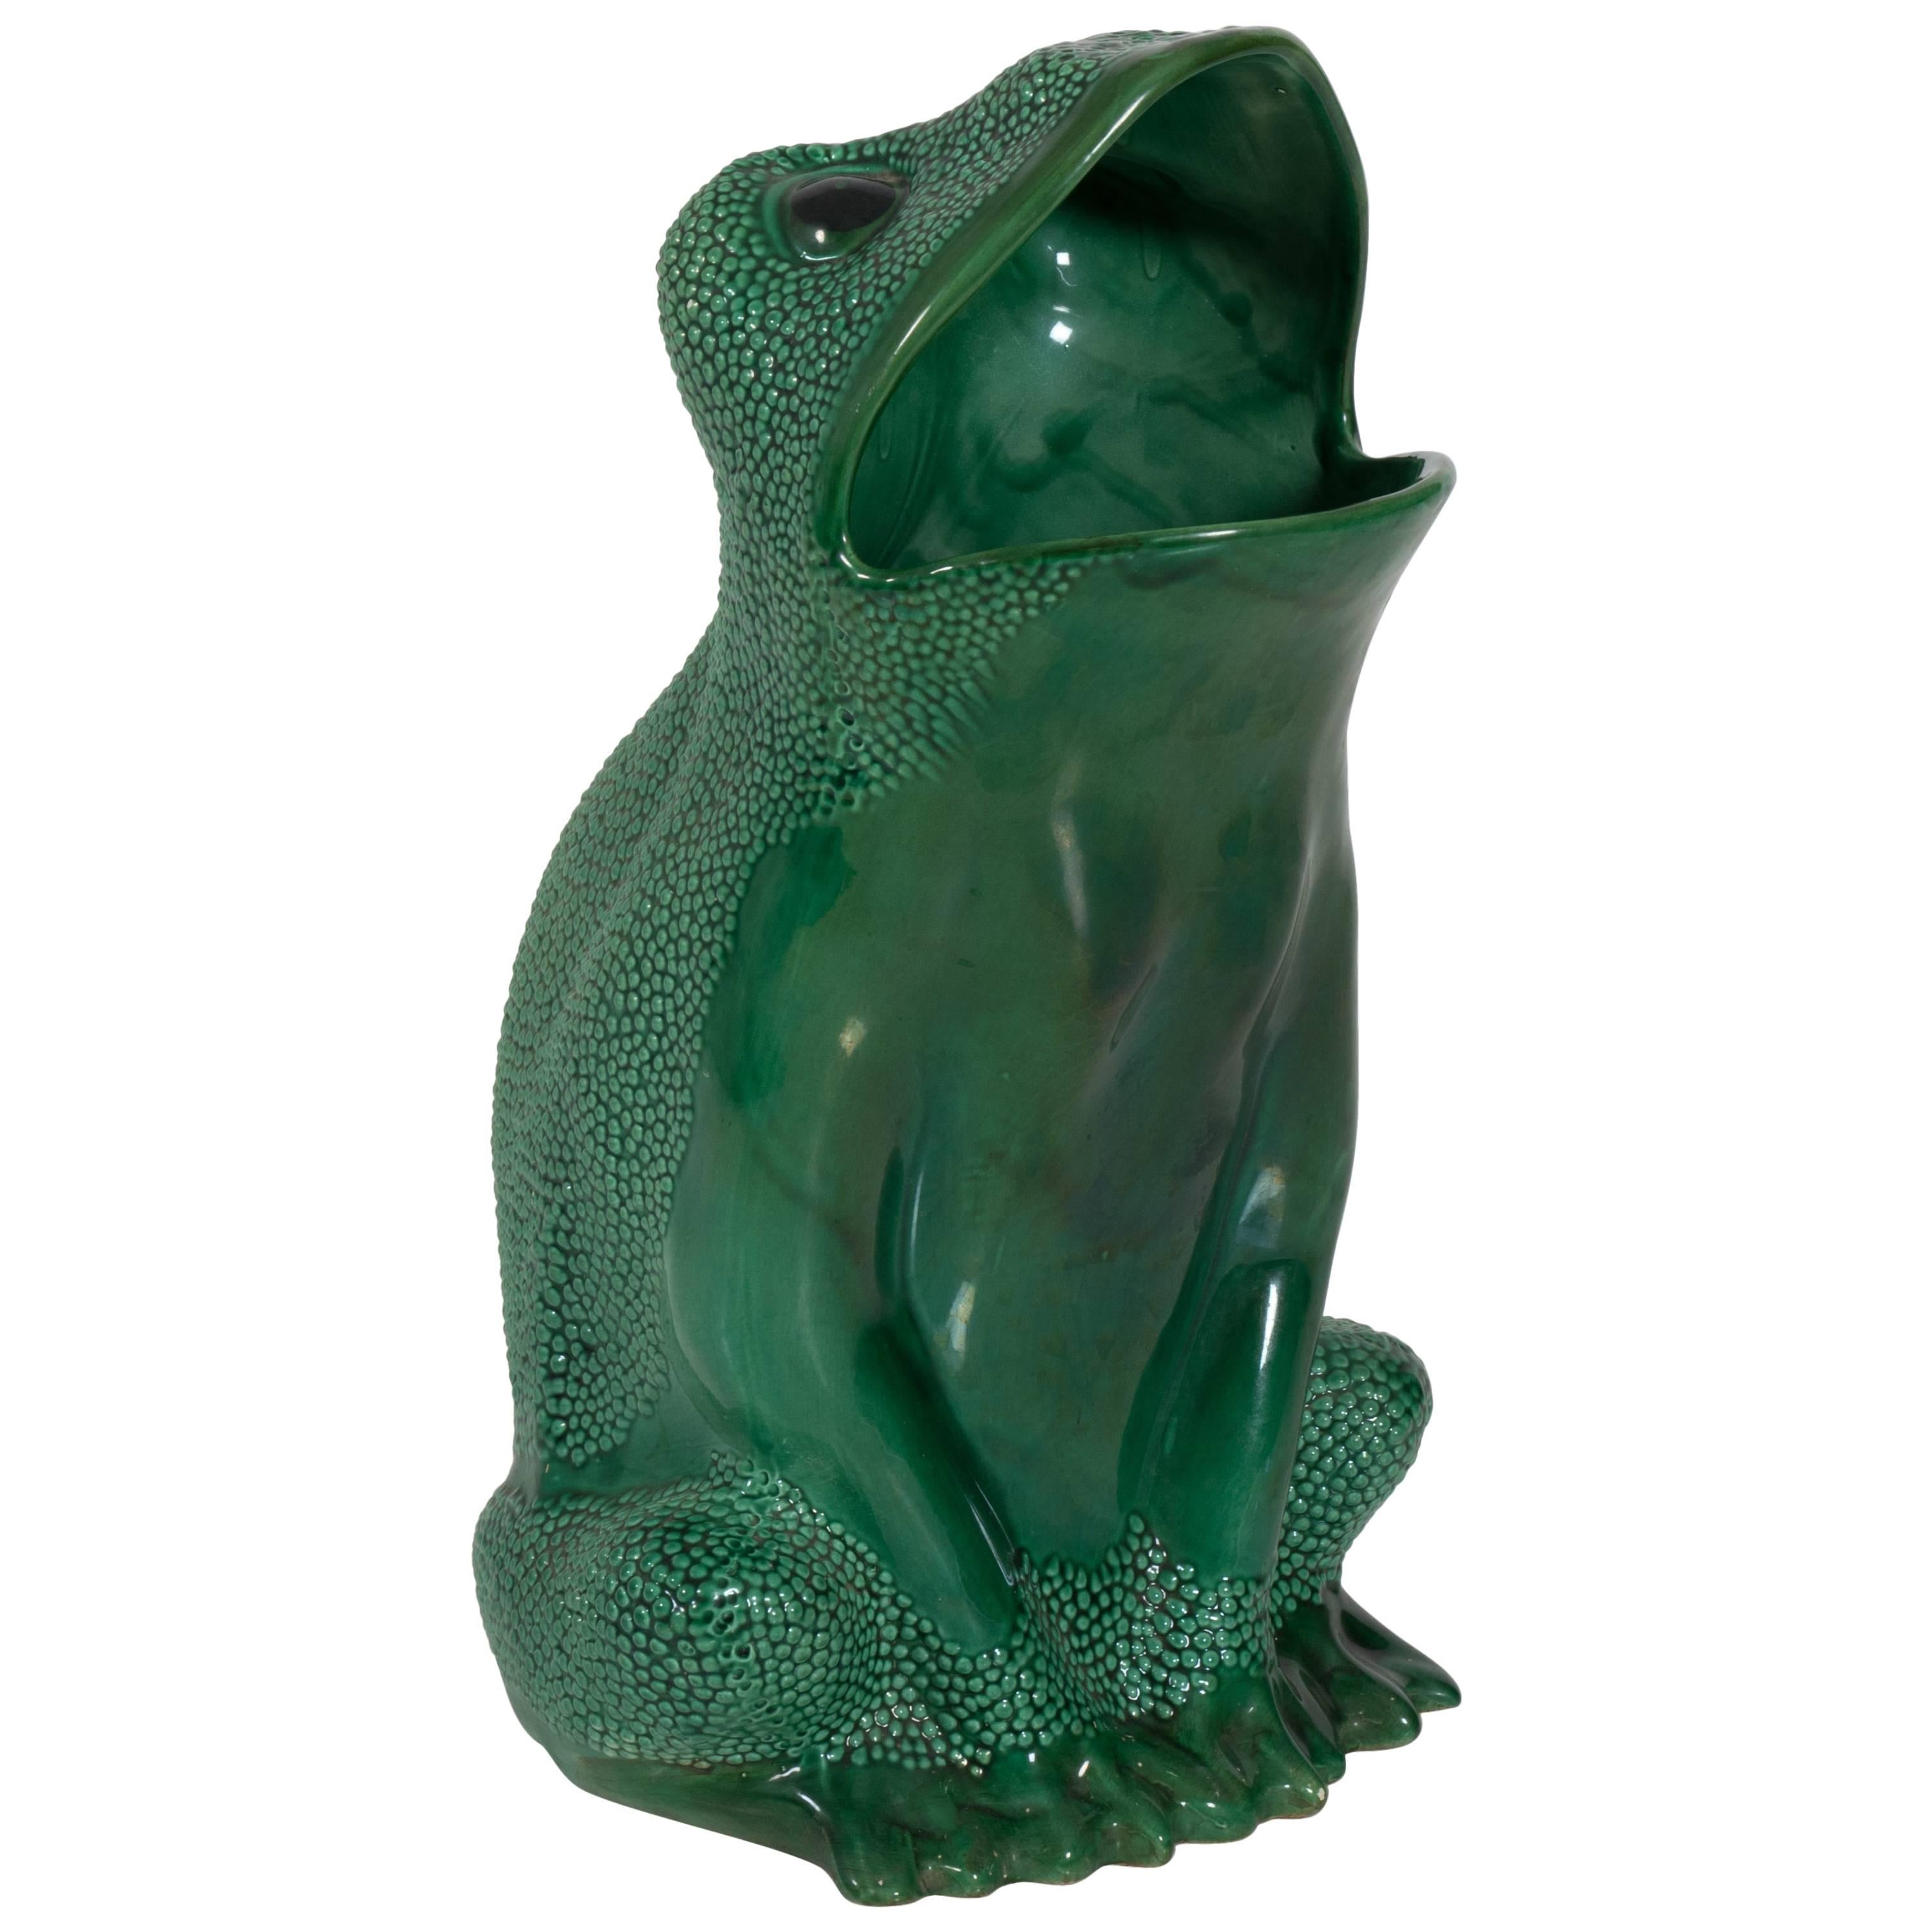 Italian Green Frog Umbrella Stand by Gumps